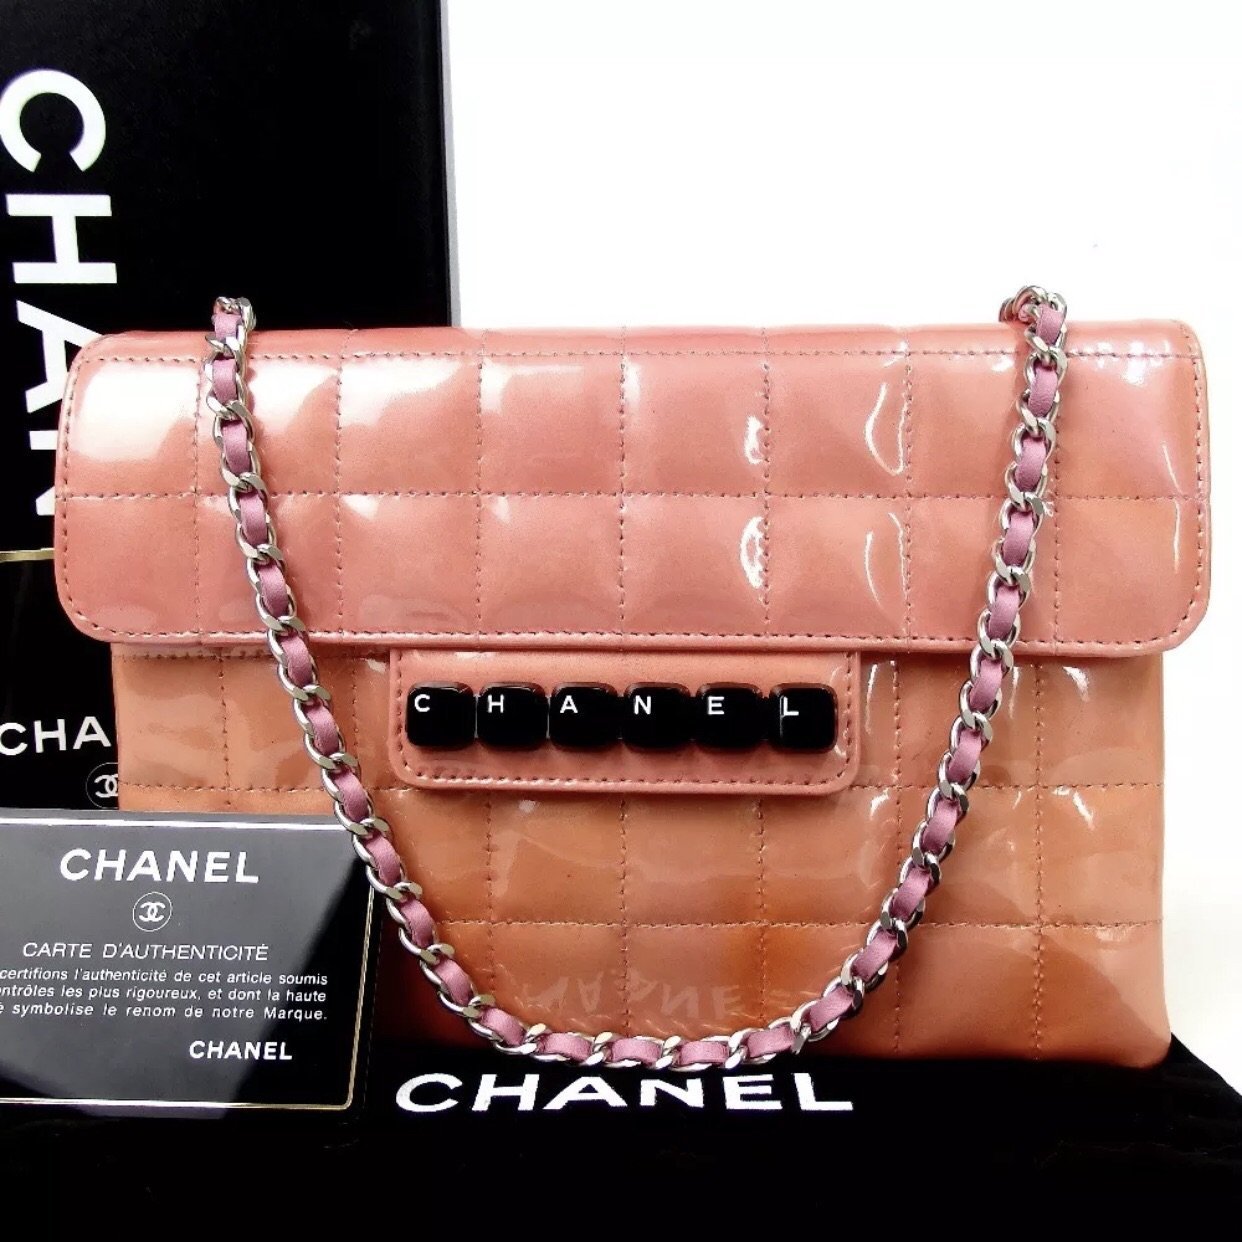 CHANEL Chocolate Bar Small Patent Leather Flap Shoulder Bag Red